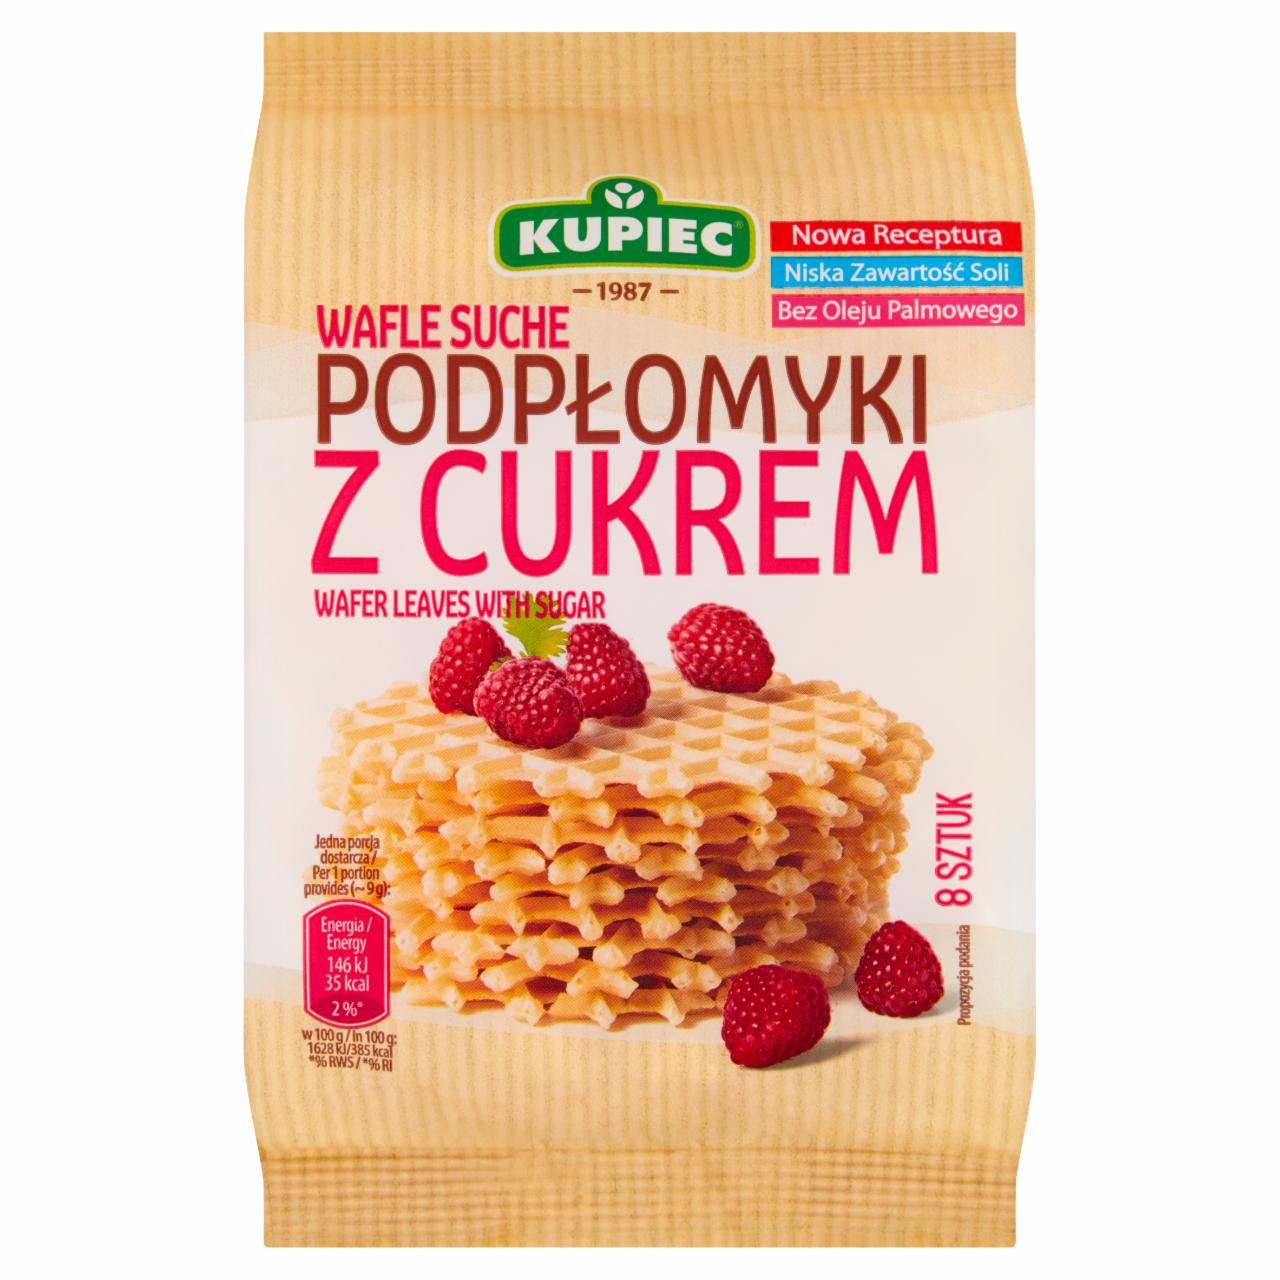 Photo - Kupiec Wafer Leaves with Sugar 72 g (8 Pieces)